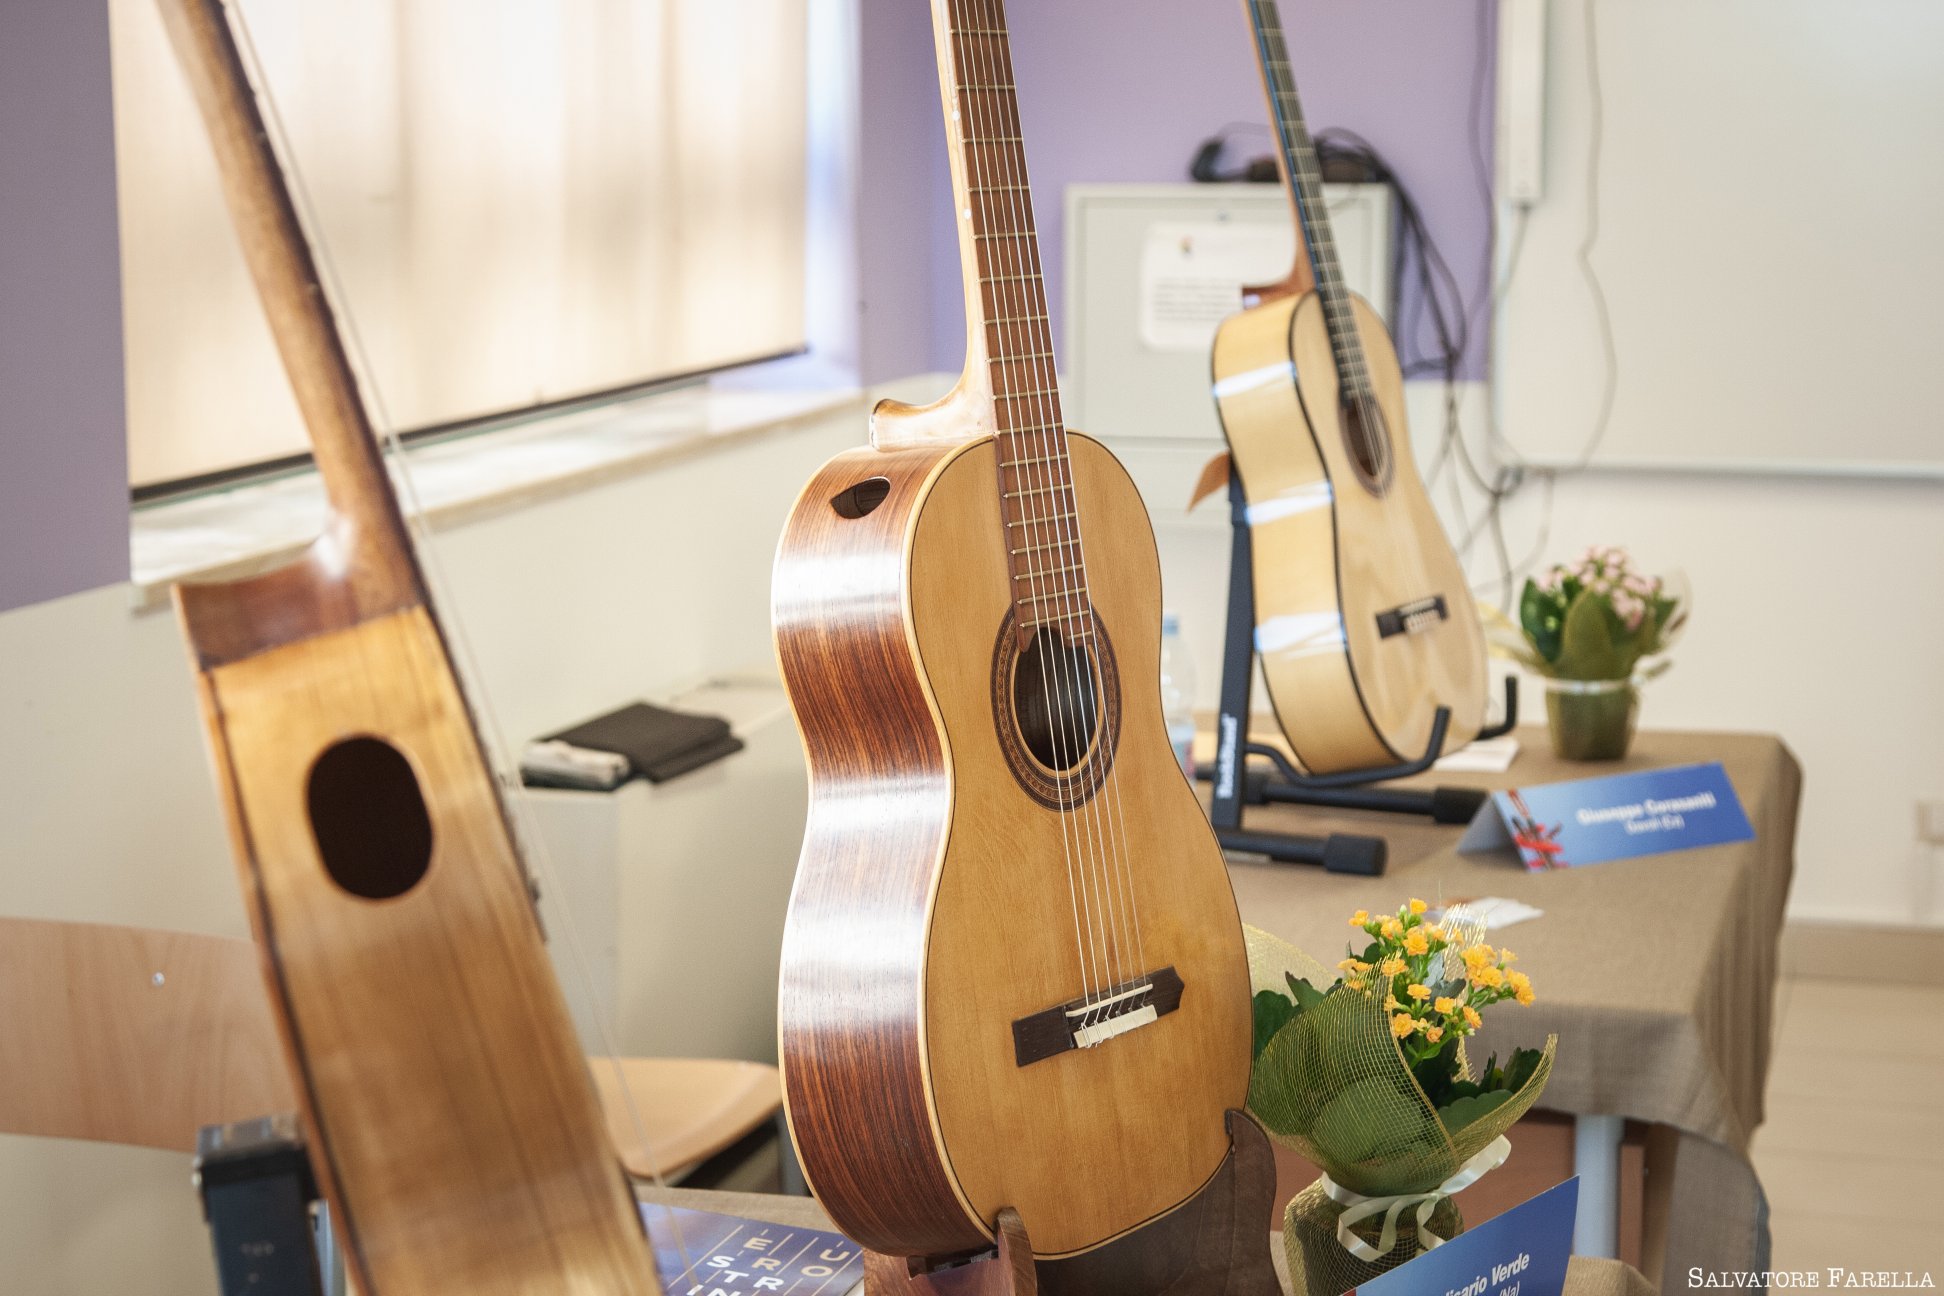 XIII Biennial Exhibition of lutherie for Guitar - Mottola (July 9-10, 2022)  